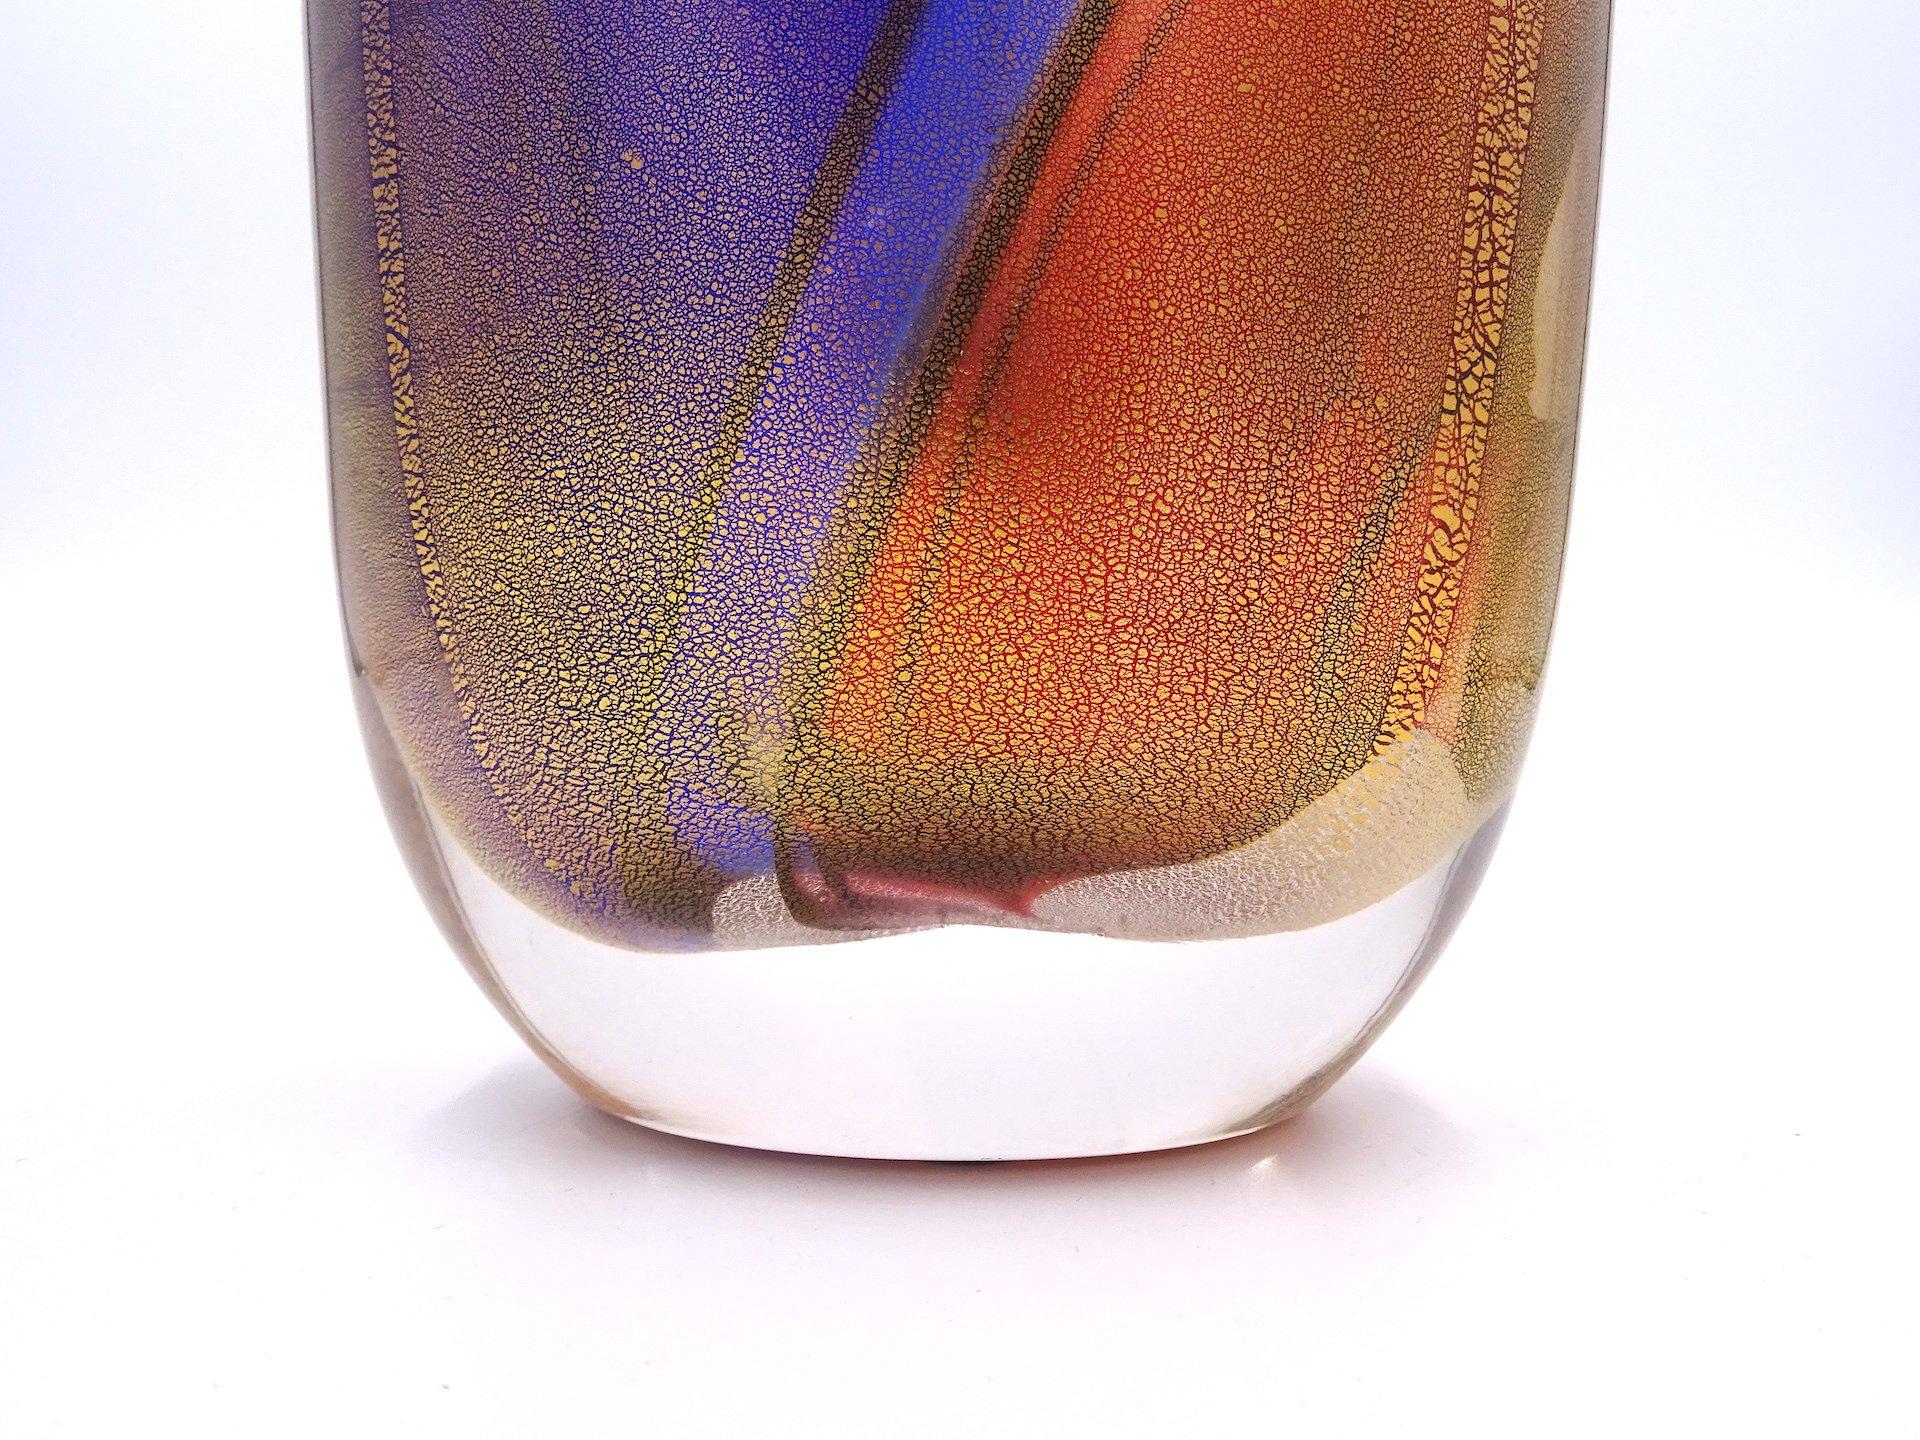 Carnival Collection Murano Glass Vase by Archimede Seguso for Seguso, 1980's For Sale 1